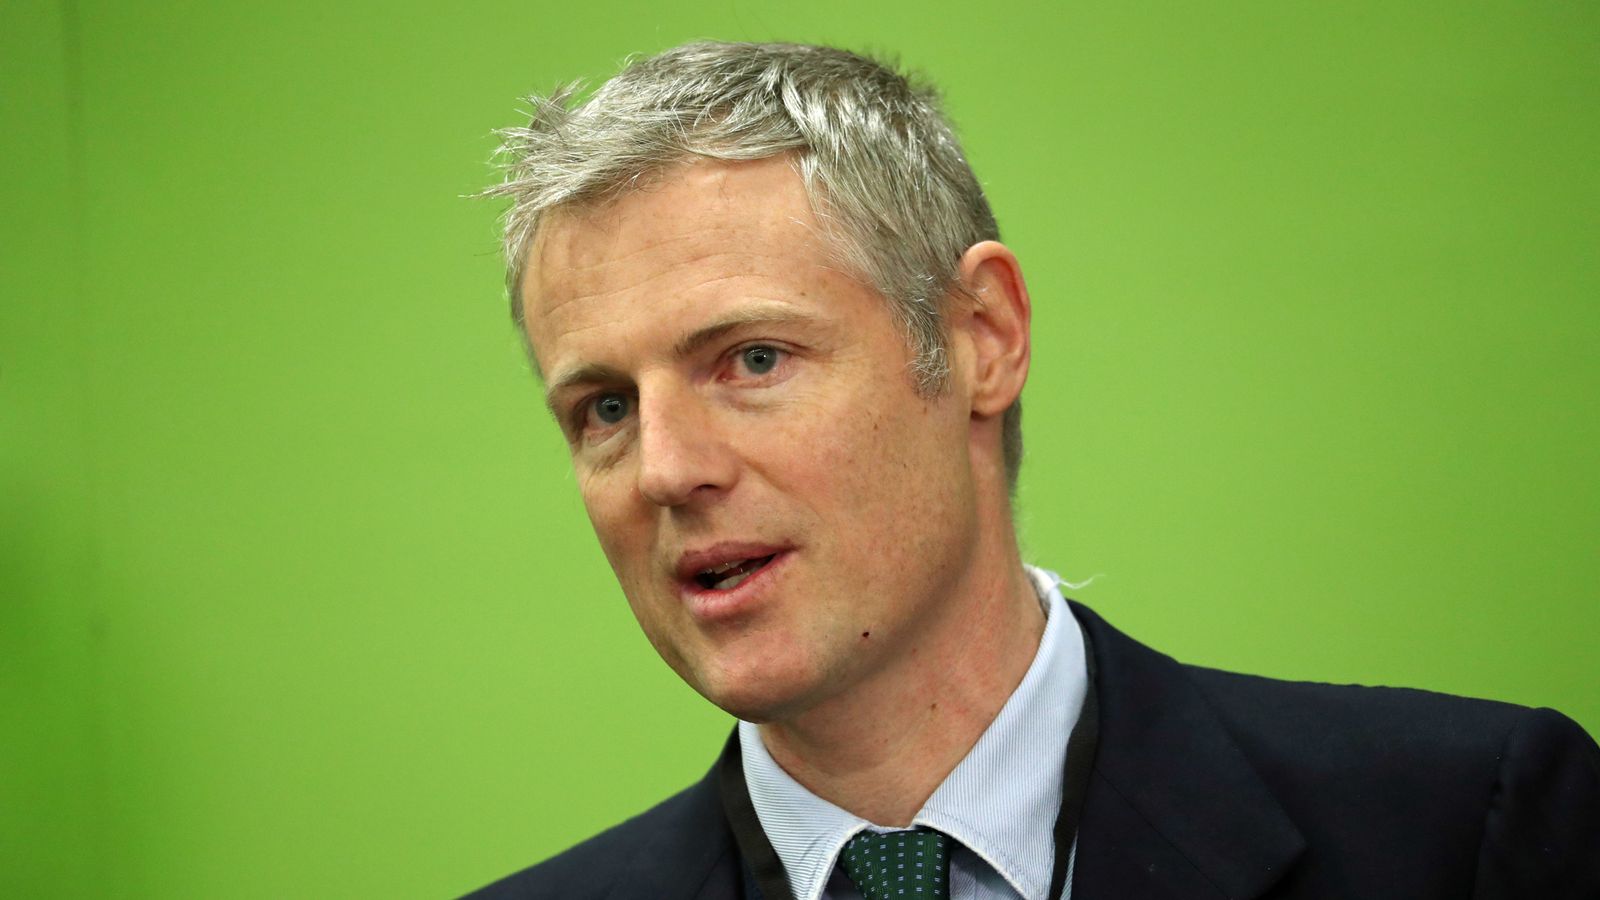 Zac Goldsmith: Tory minister named in Boris Johnson partygate interference report quits over after refusing to apologise